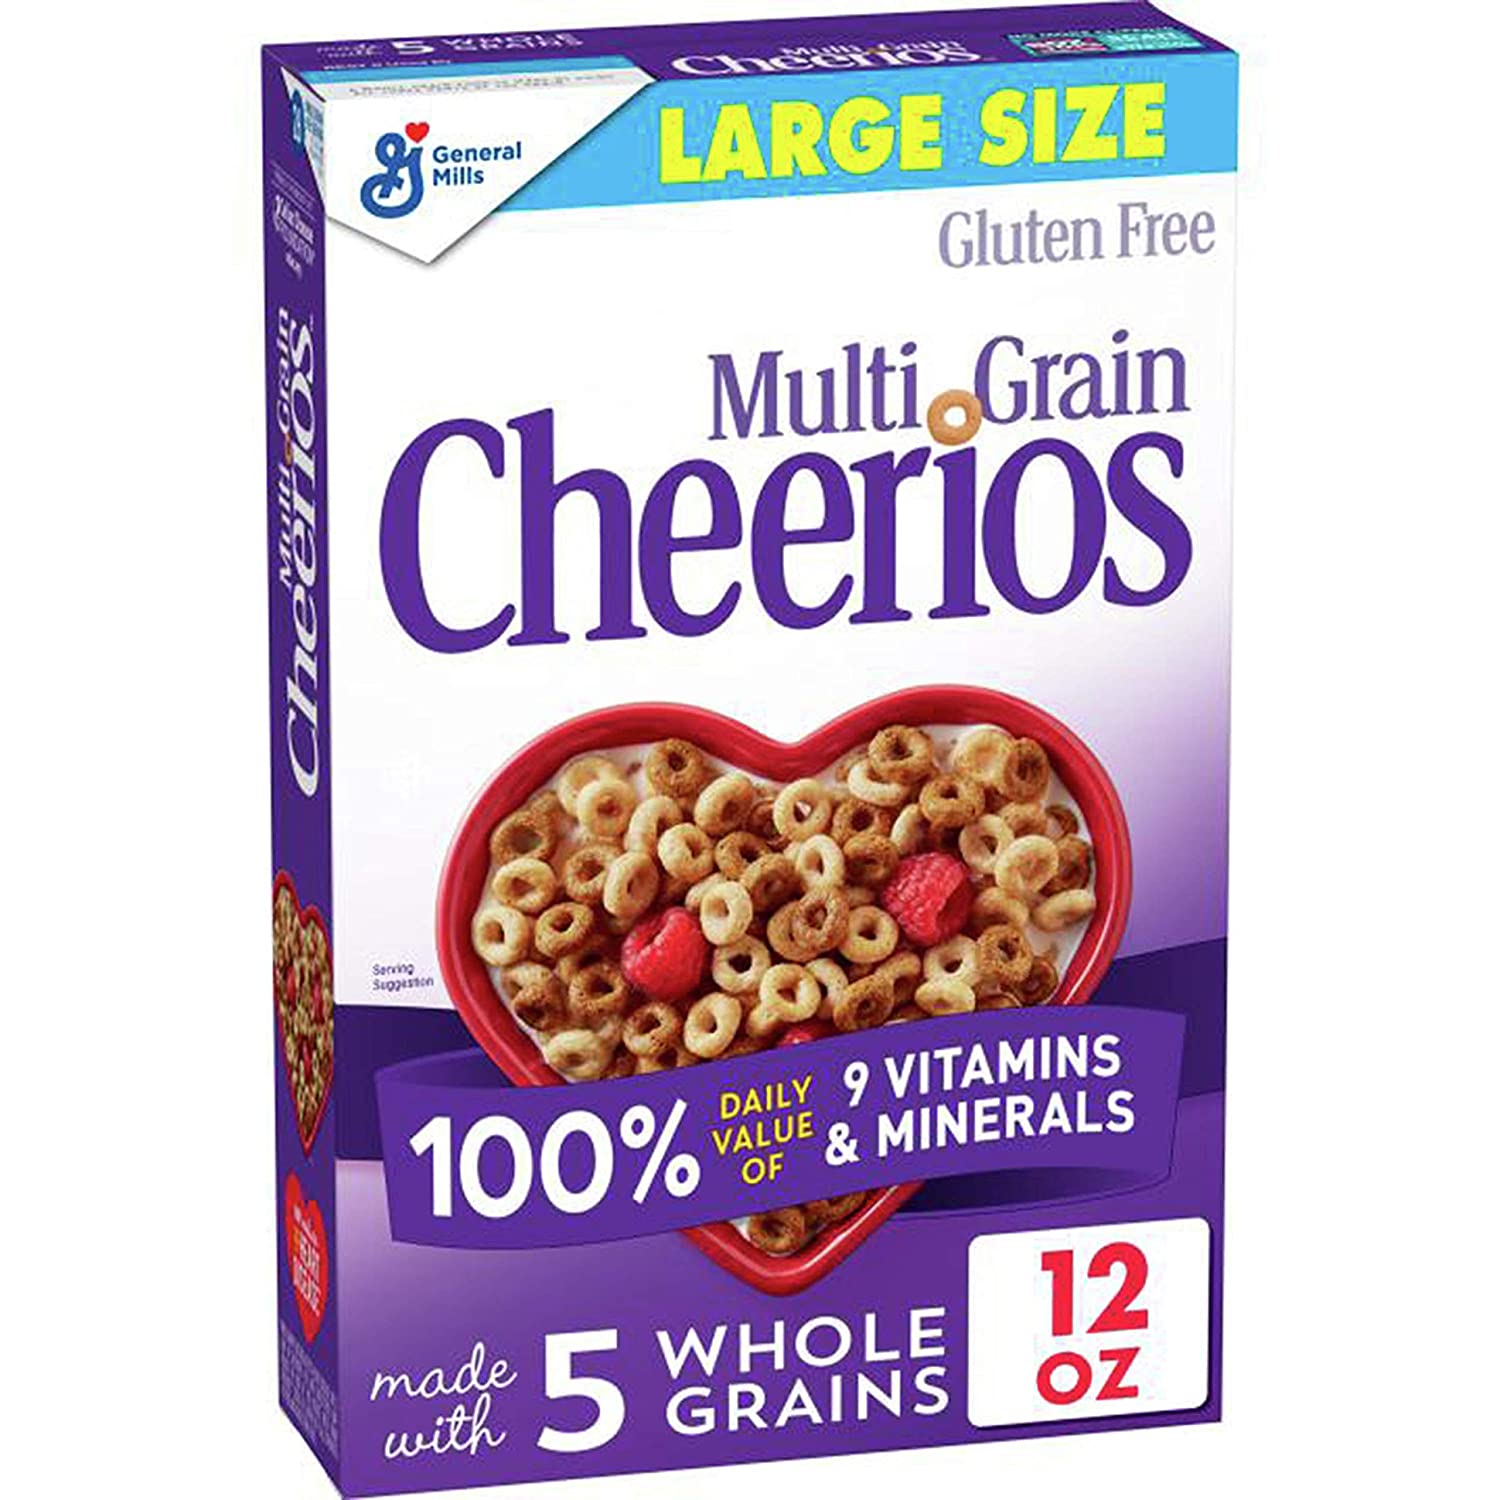 Multi Grain Cheerios Only $1.23 SHIPPED!